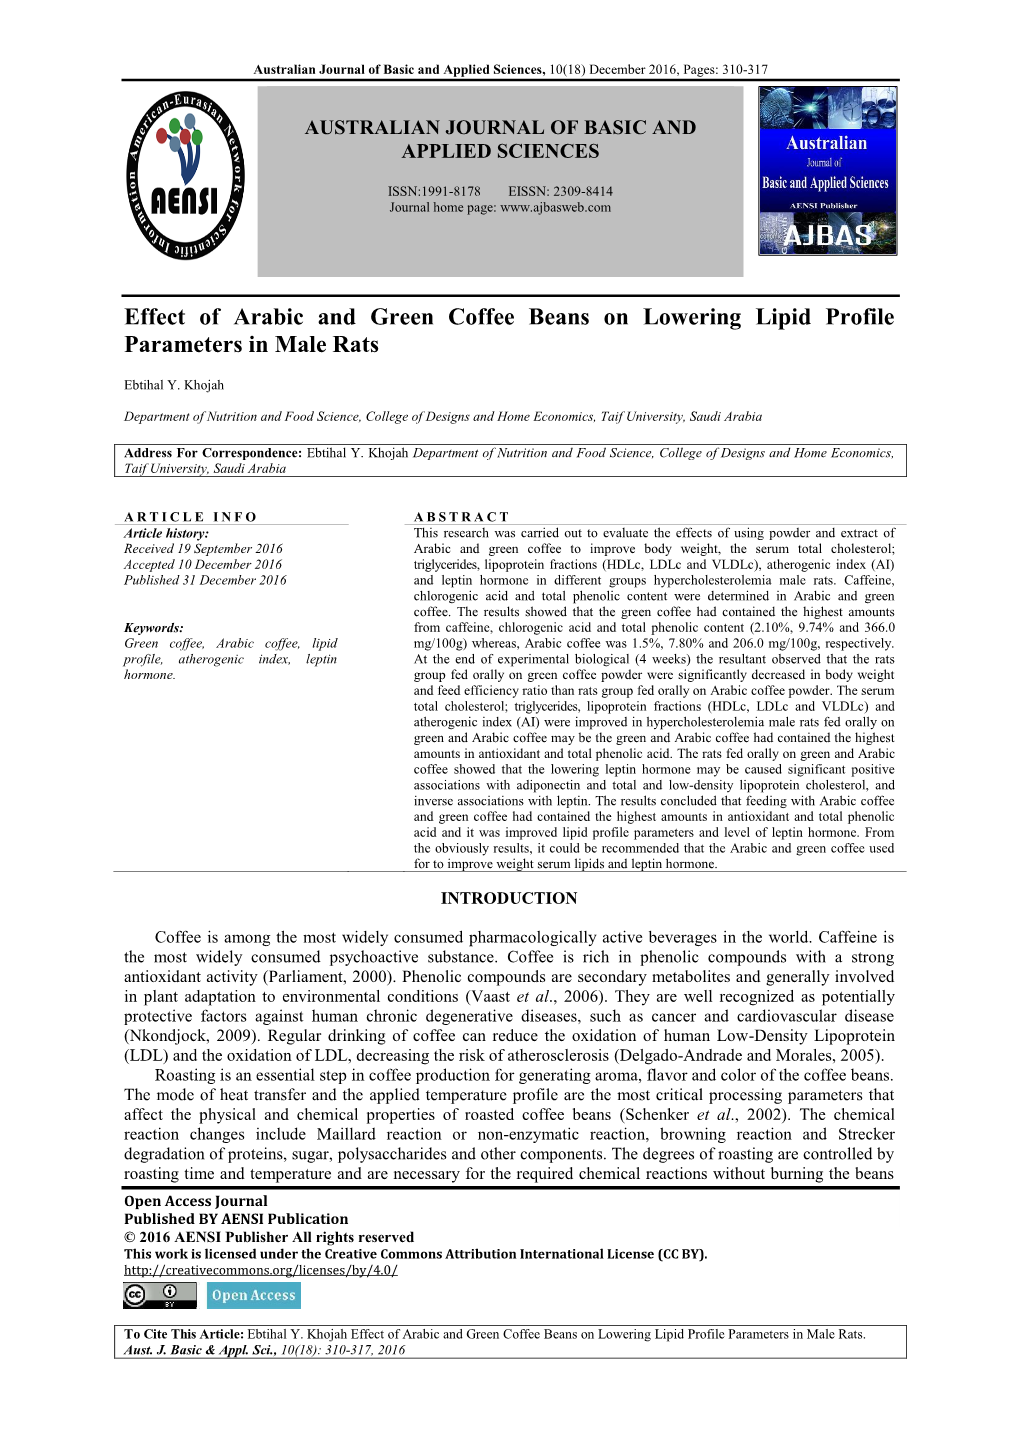 Effect of Arabic and Green Coffee Beans on Lowering Lipid Profile Parameters in Male Rats